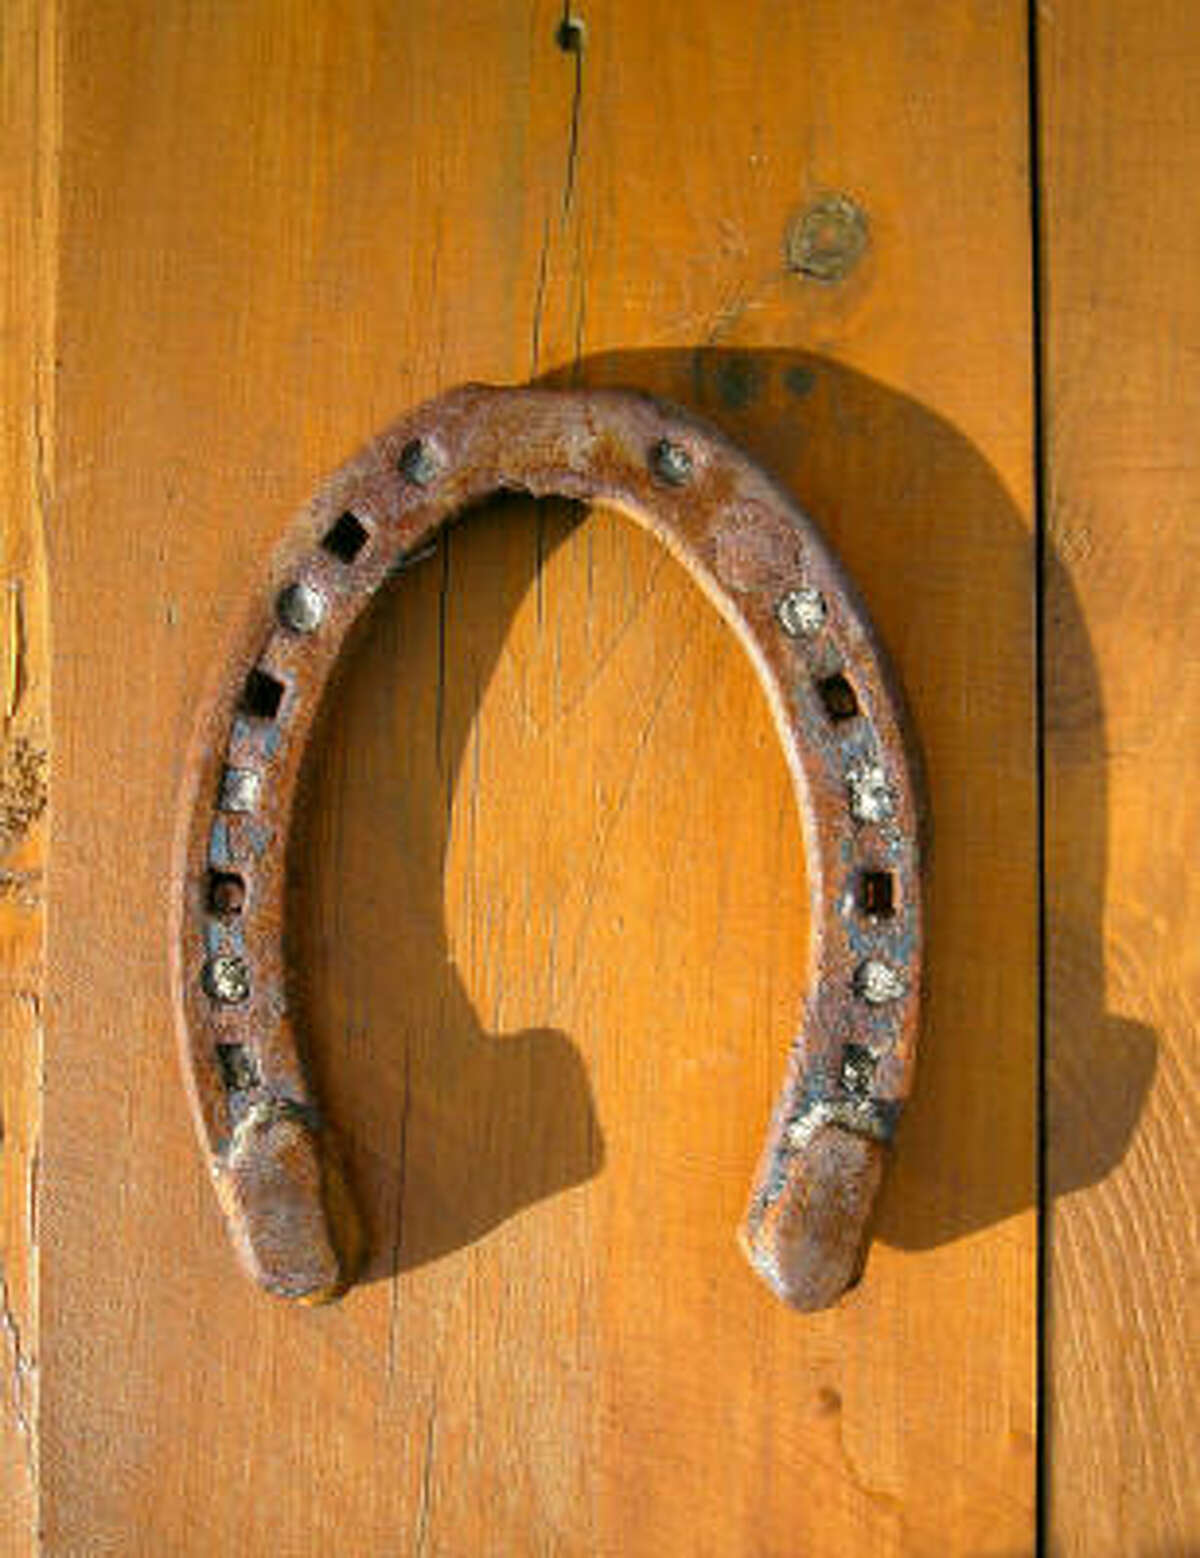 Hanging a horseshoe upside down lets the good luck drain out.